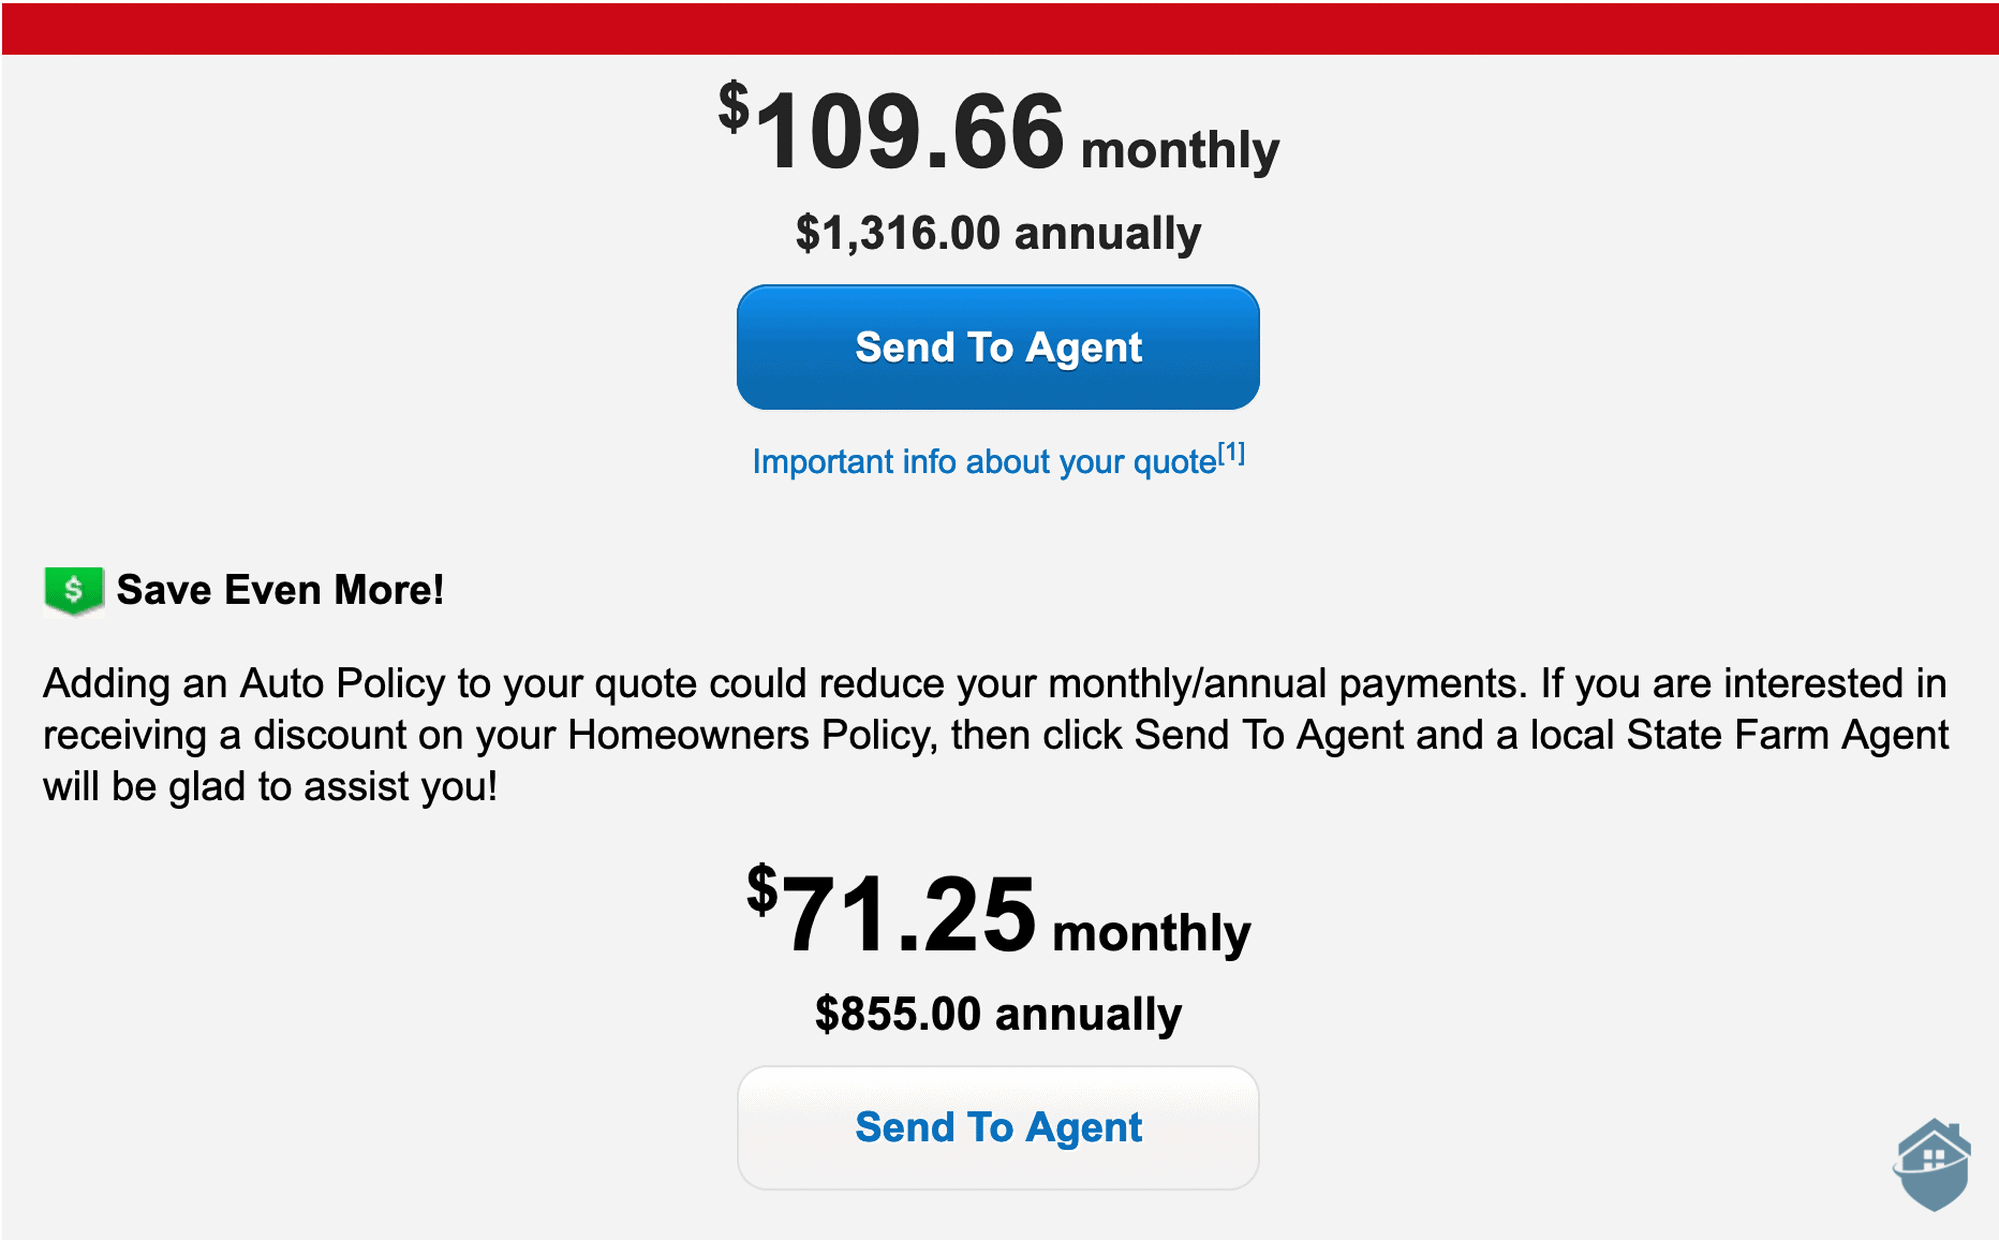 My State Farm quote was excellent value for money, even before bundling